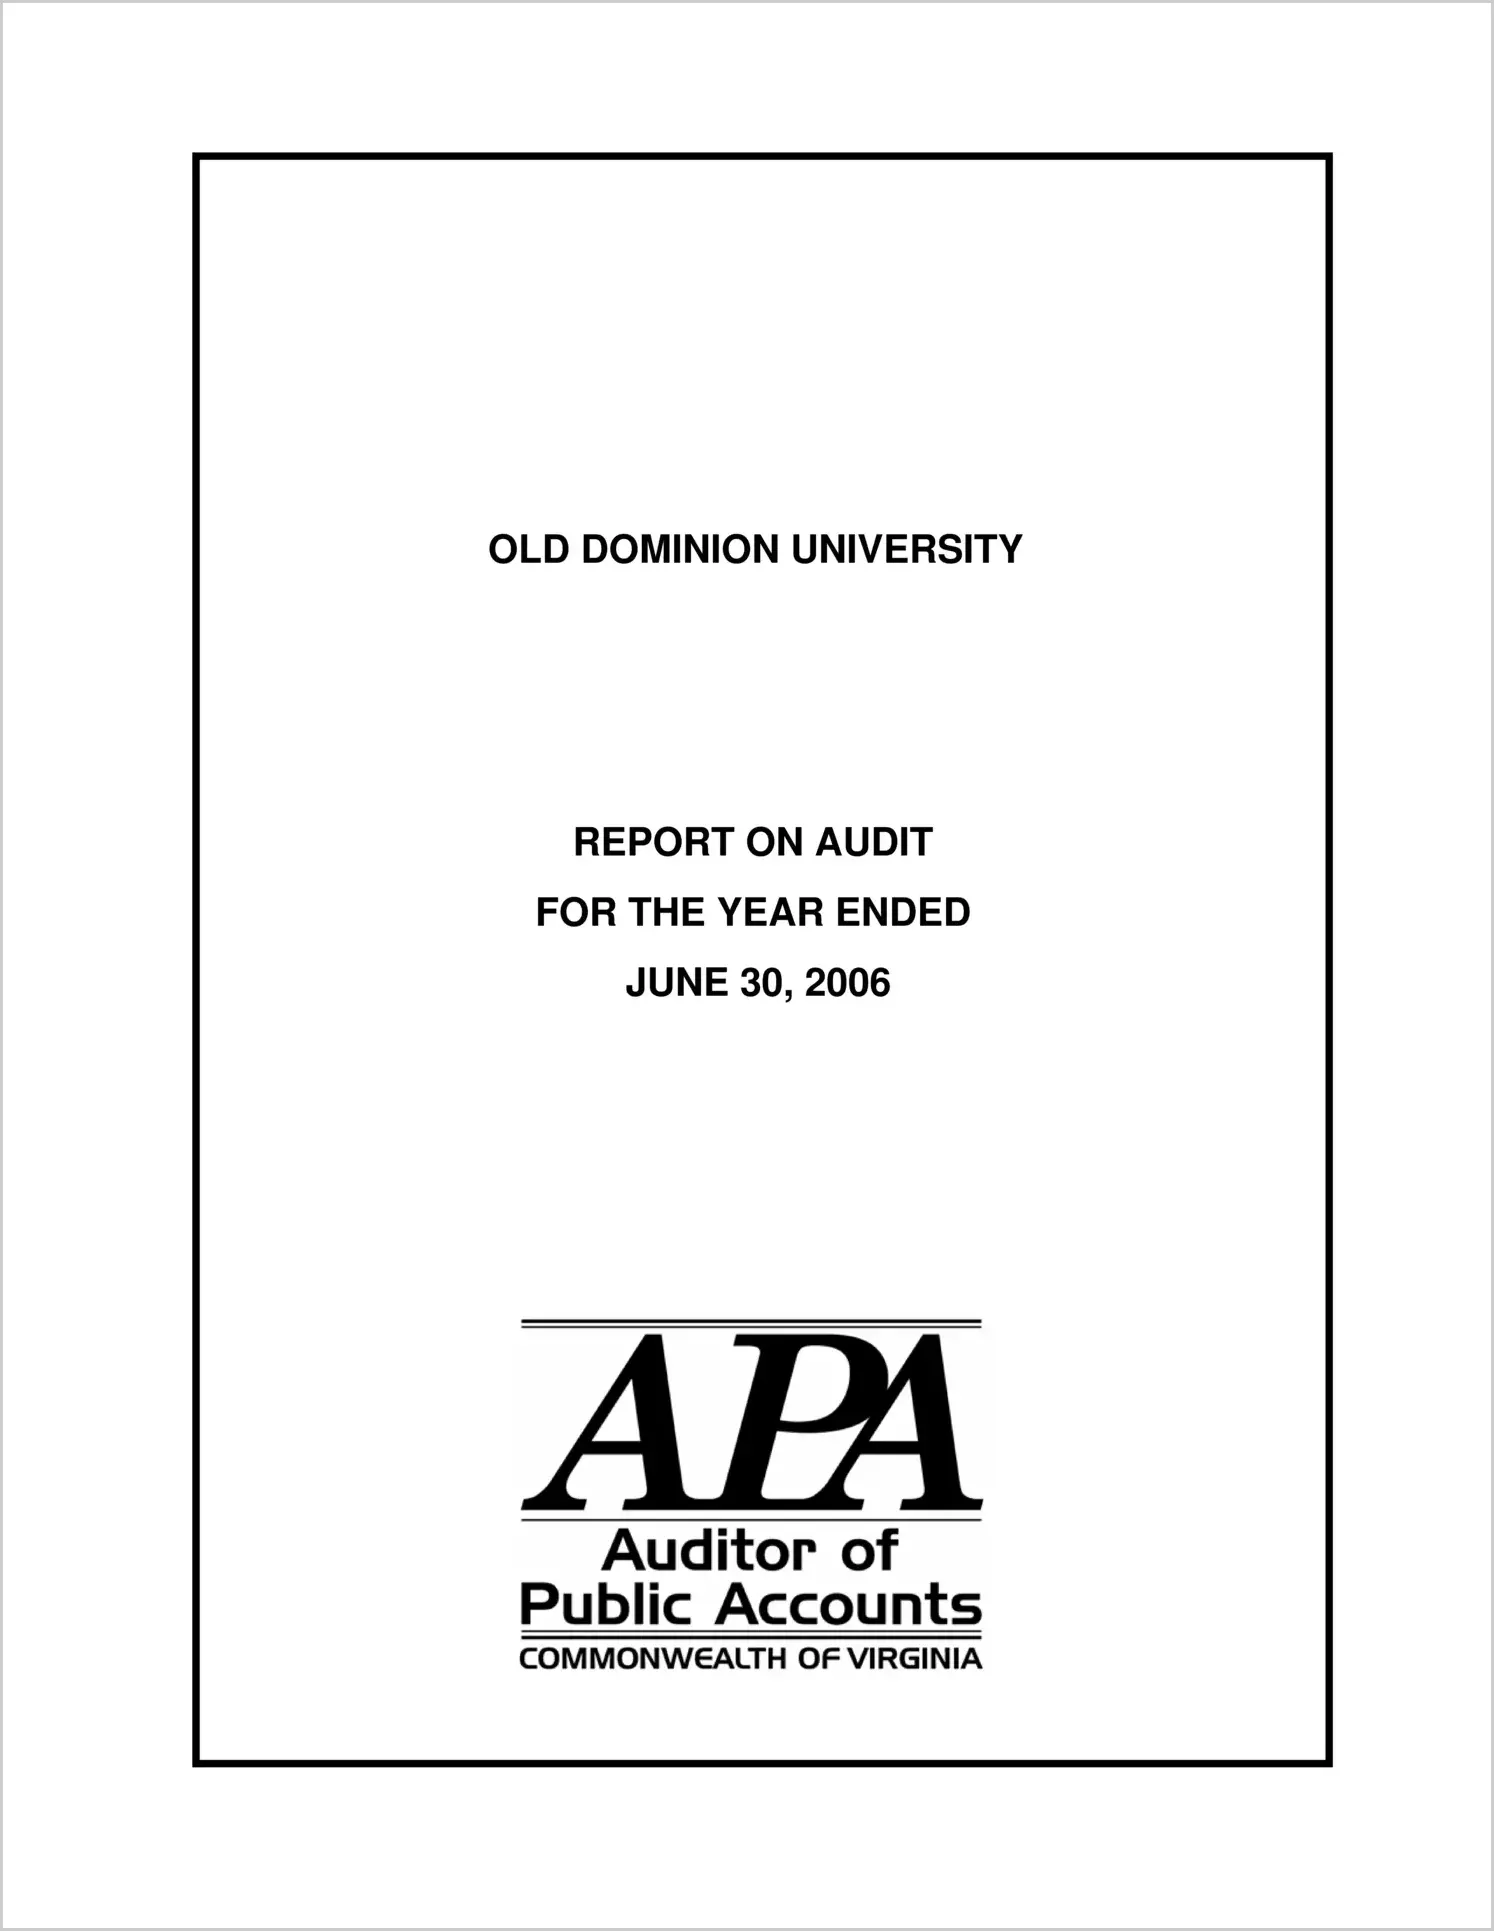 Old Dominion University for the year ended June 30, 2006